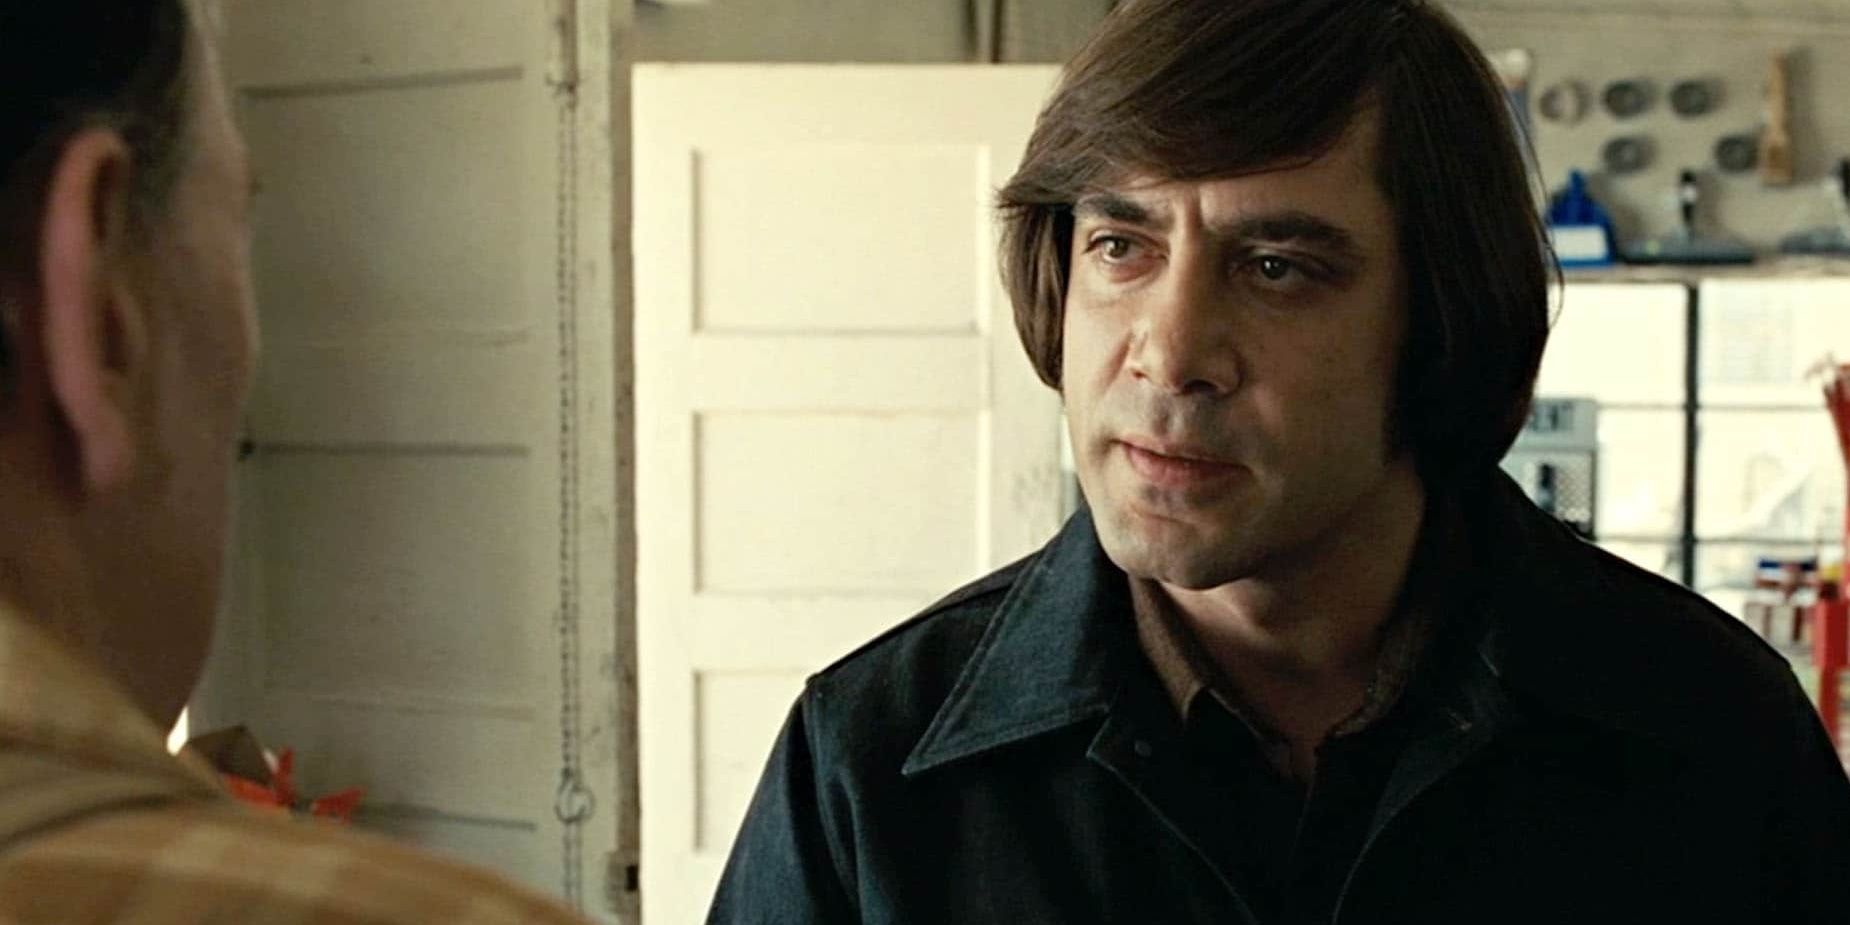 Anton Chigurh talks to an old man in No Country for Old Men